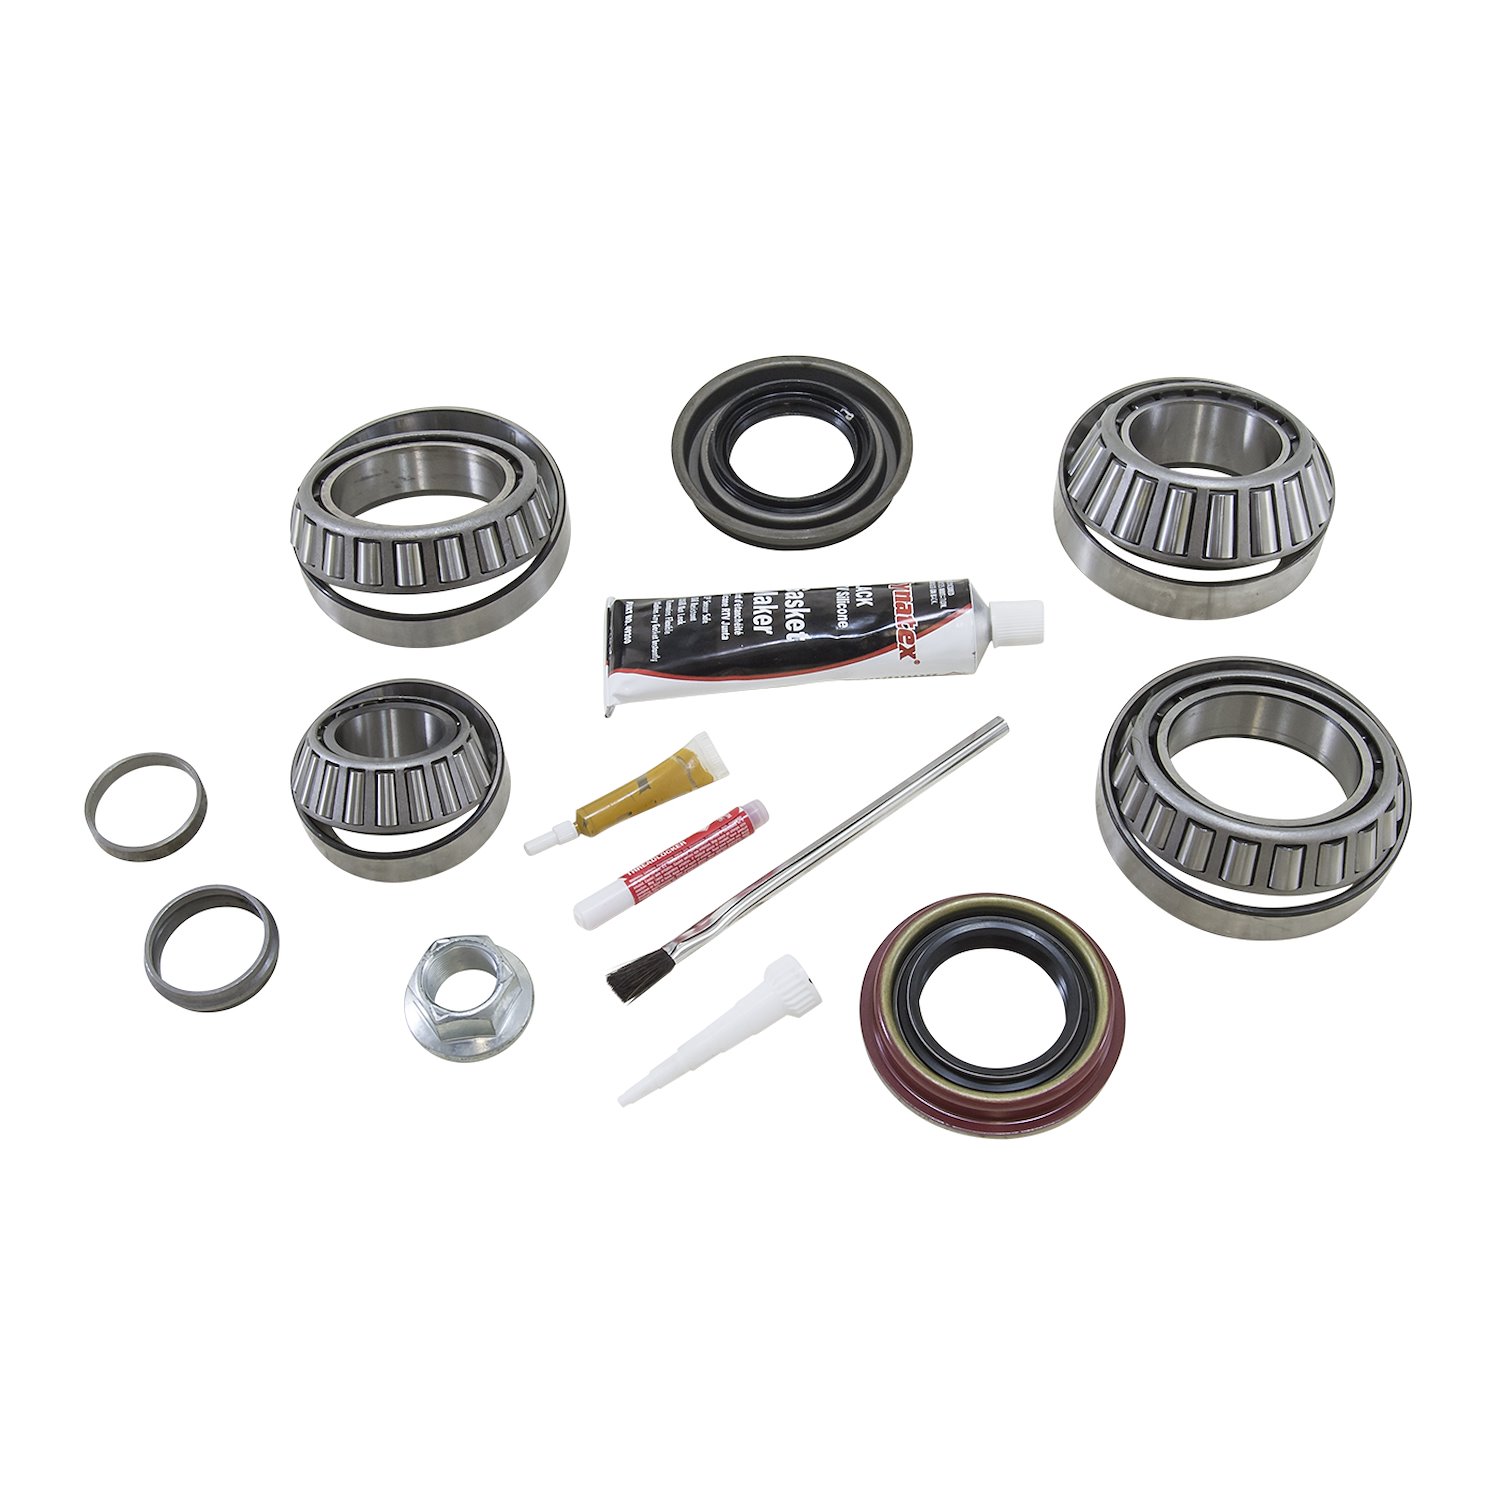 USA Standard ZBKF10.5B Bearing Kit, '08-'10 Ford 10.5 in. With Aftermarket Ring & Pinion Set